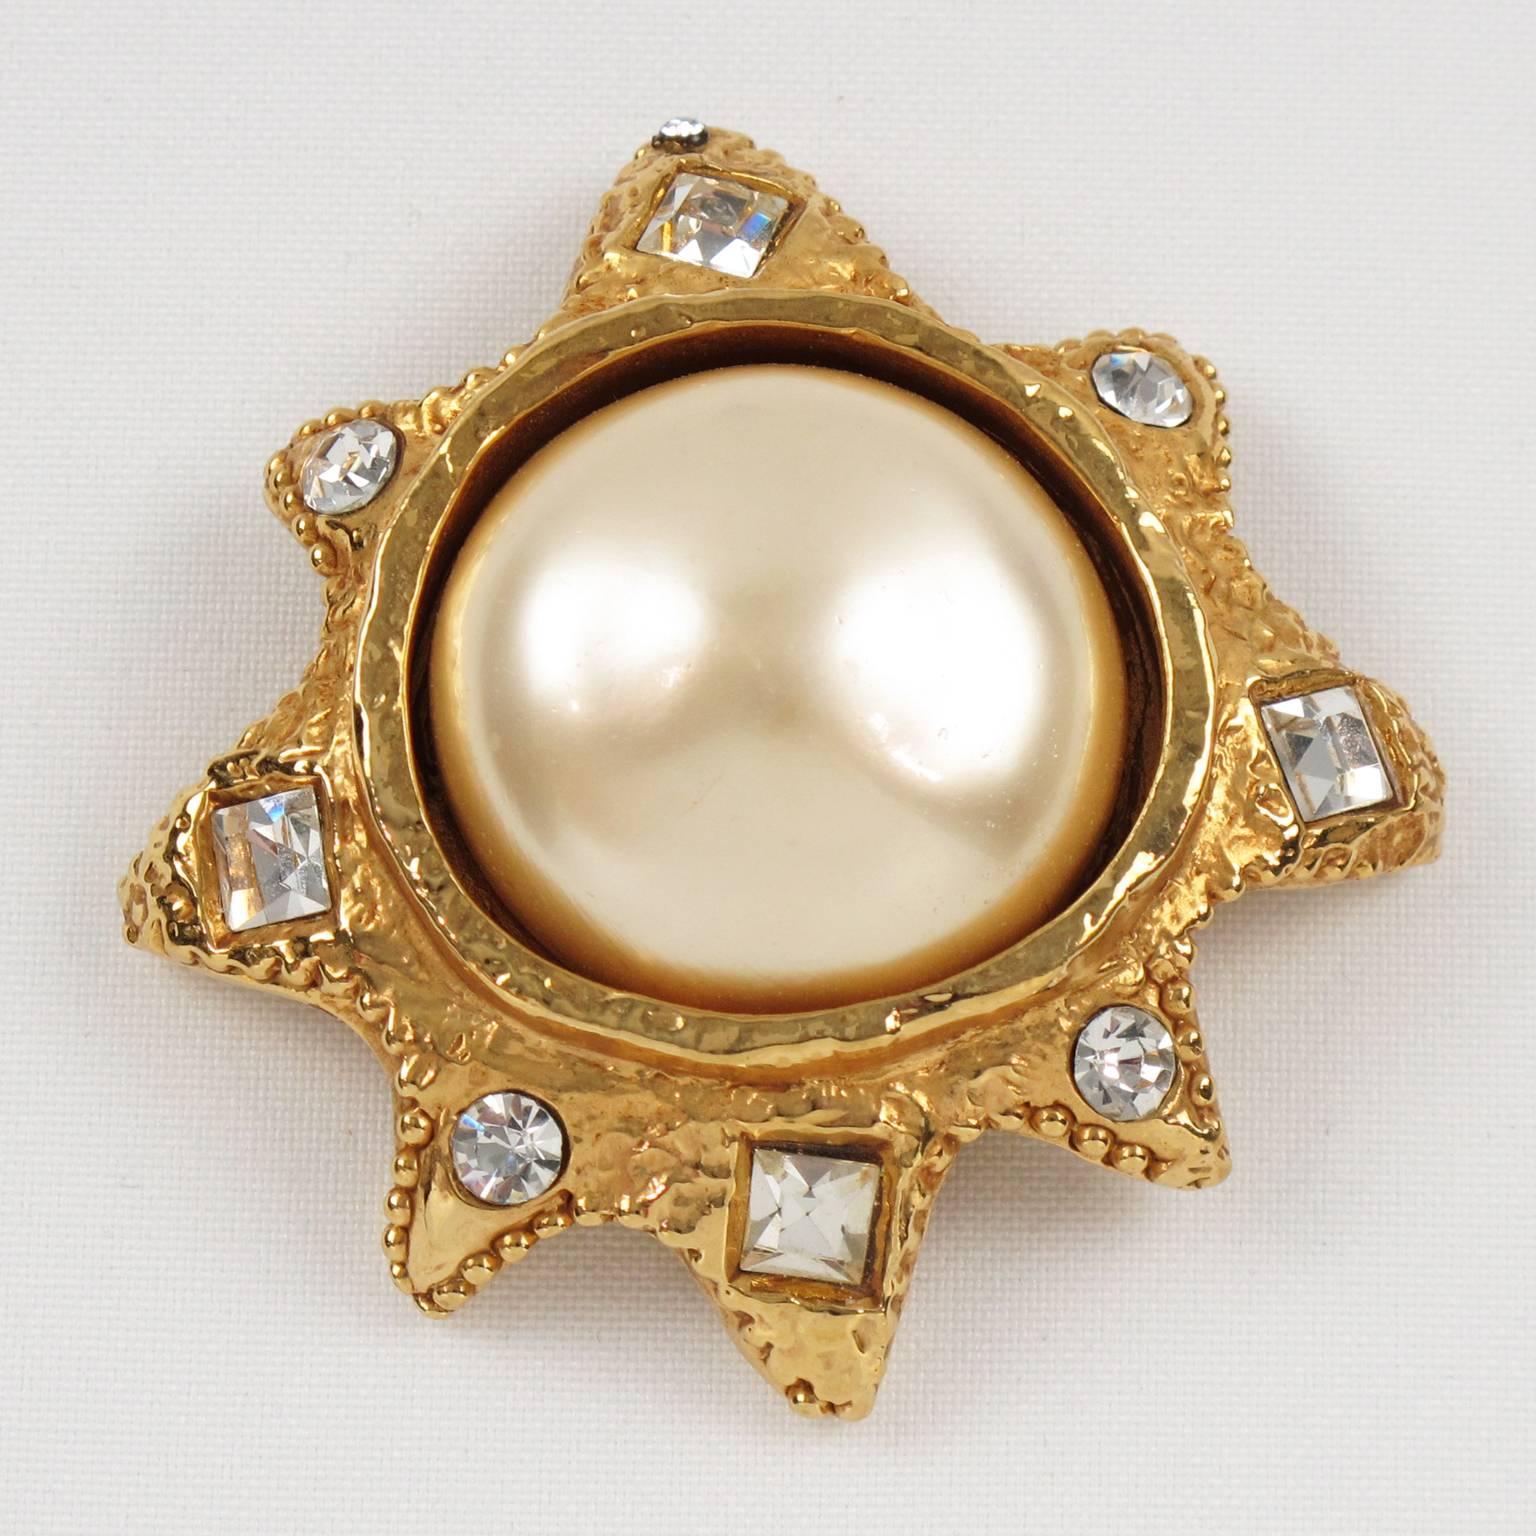 Vintage French designer Alexis Lahellec Paris signed pin brooch. Unusual piece featuring a large gilt resin sun, all textured topped with huge half pearl imitation and compliment with clear rhinestones. Signed at the back: 